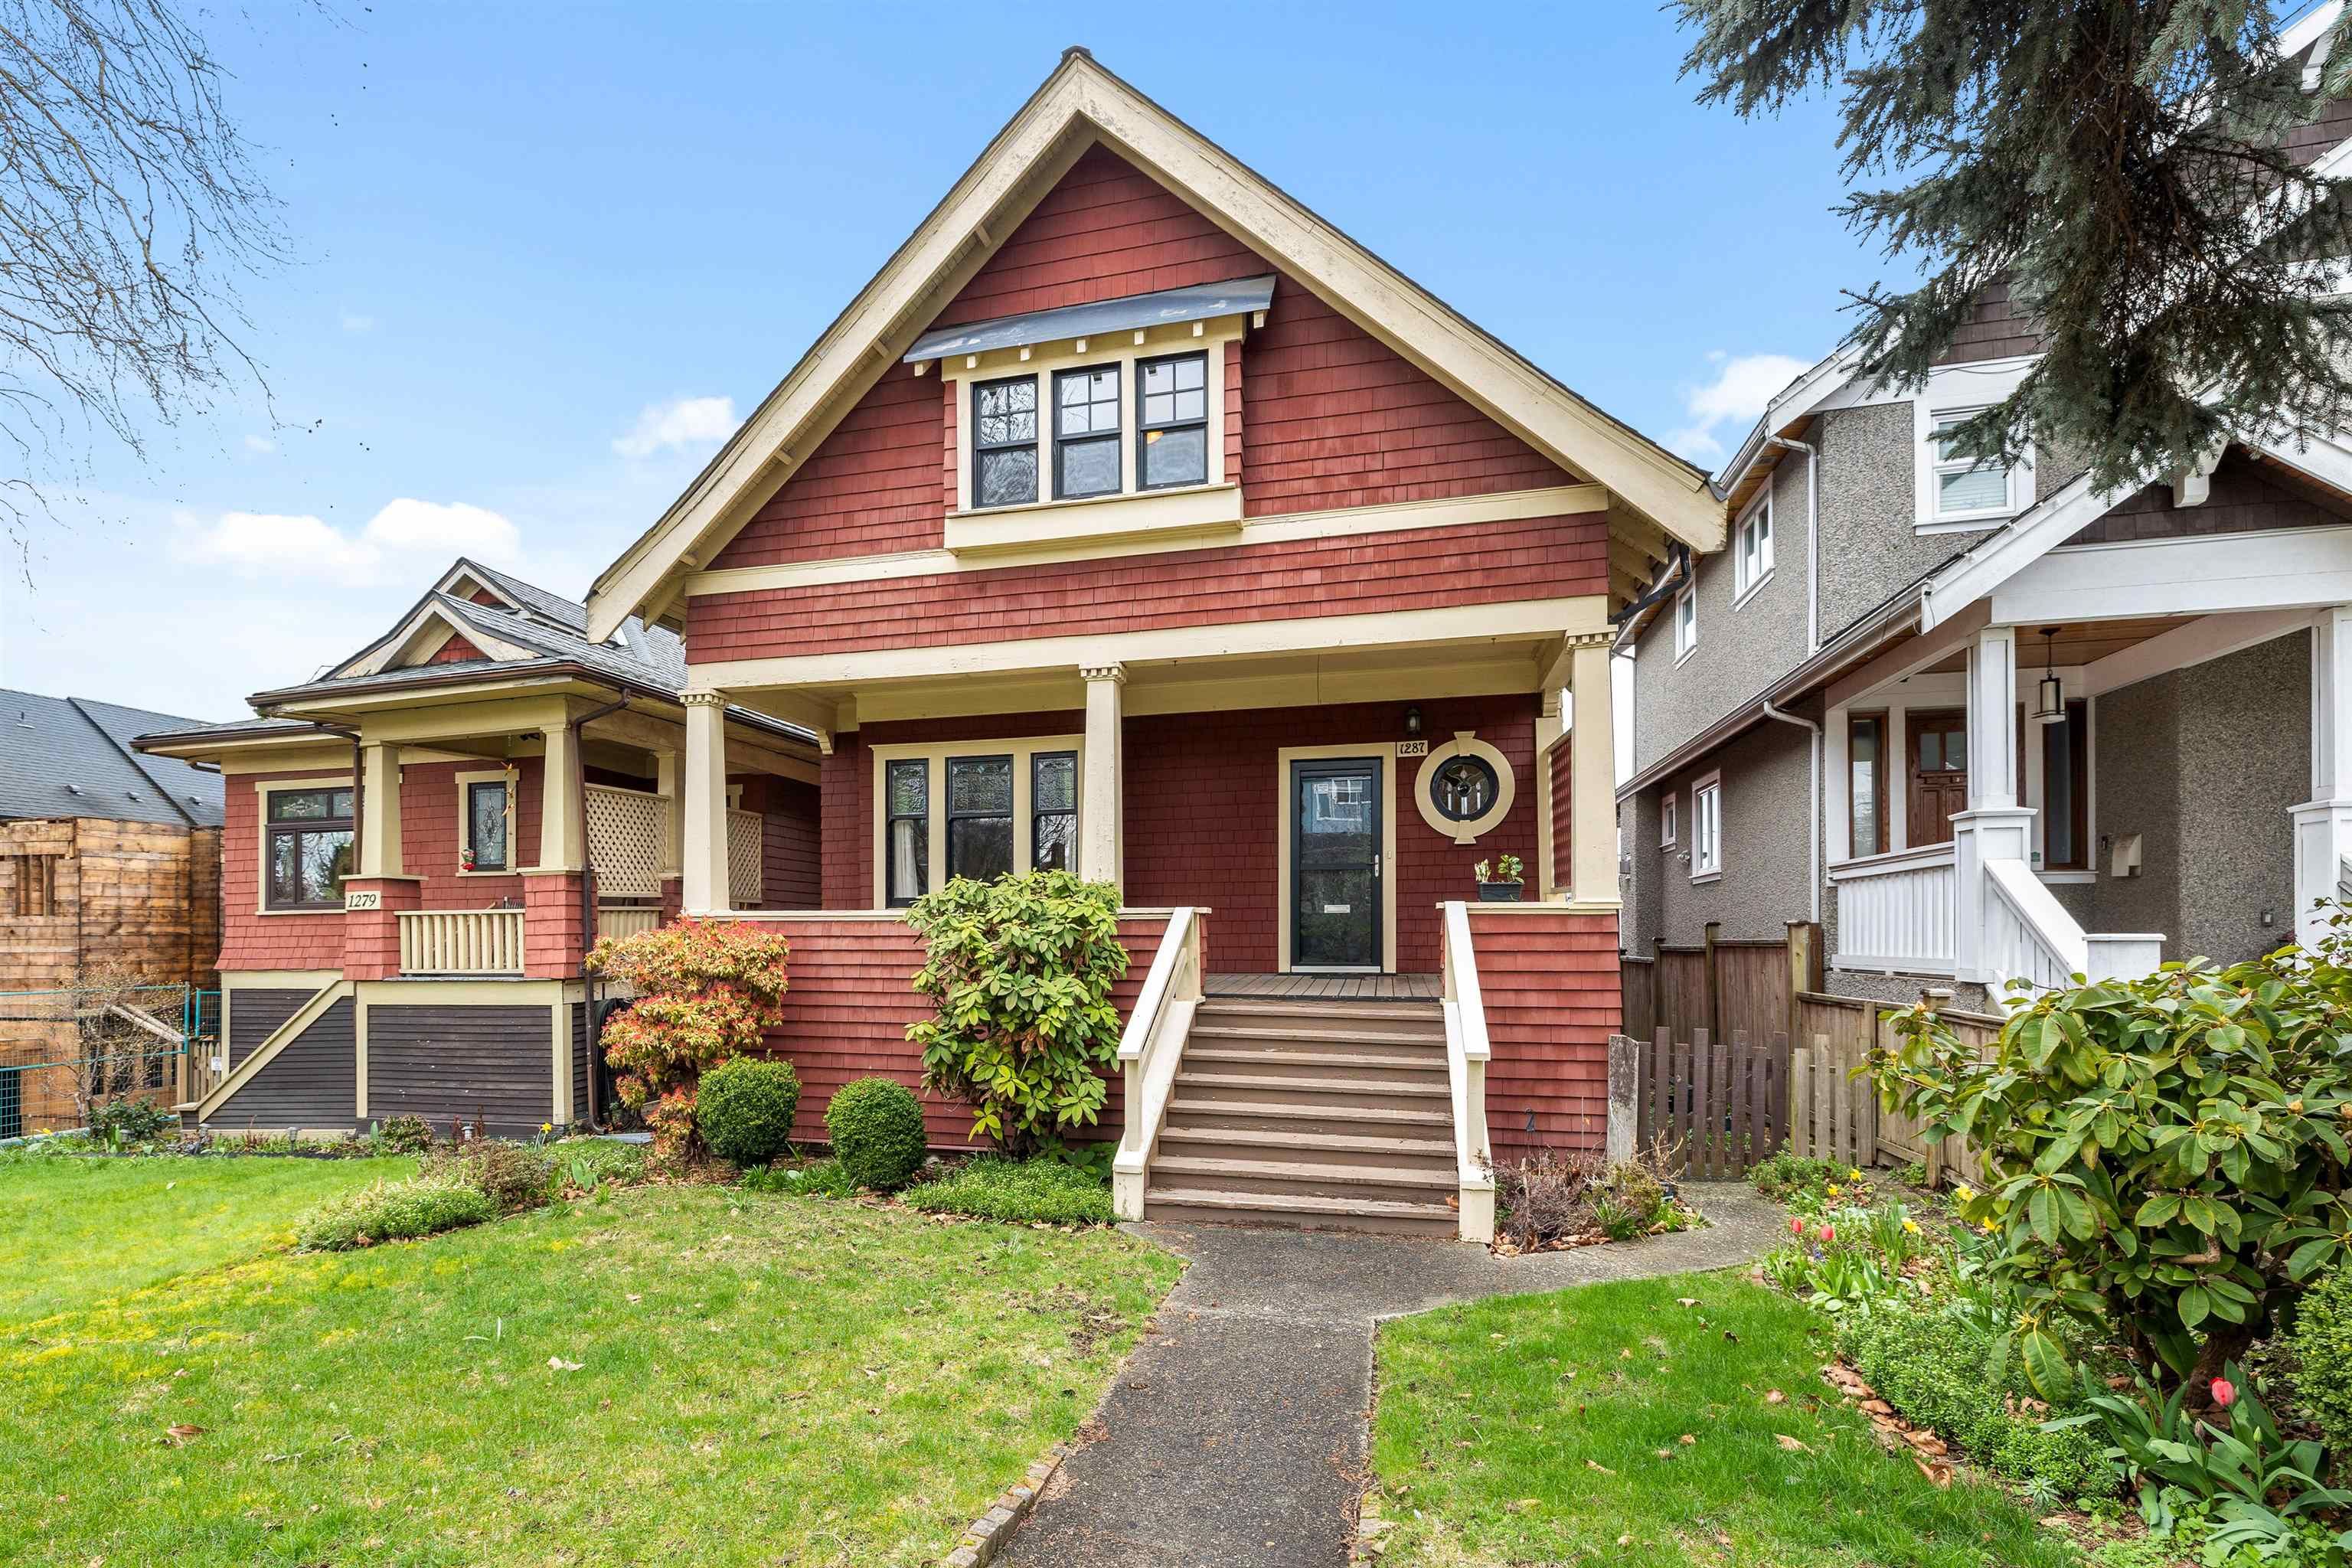 I have sold a property at 1287 28TH AVE E in Vancouver
